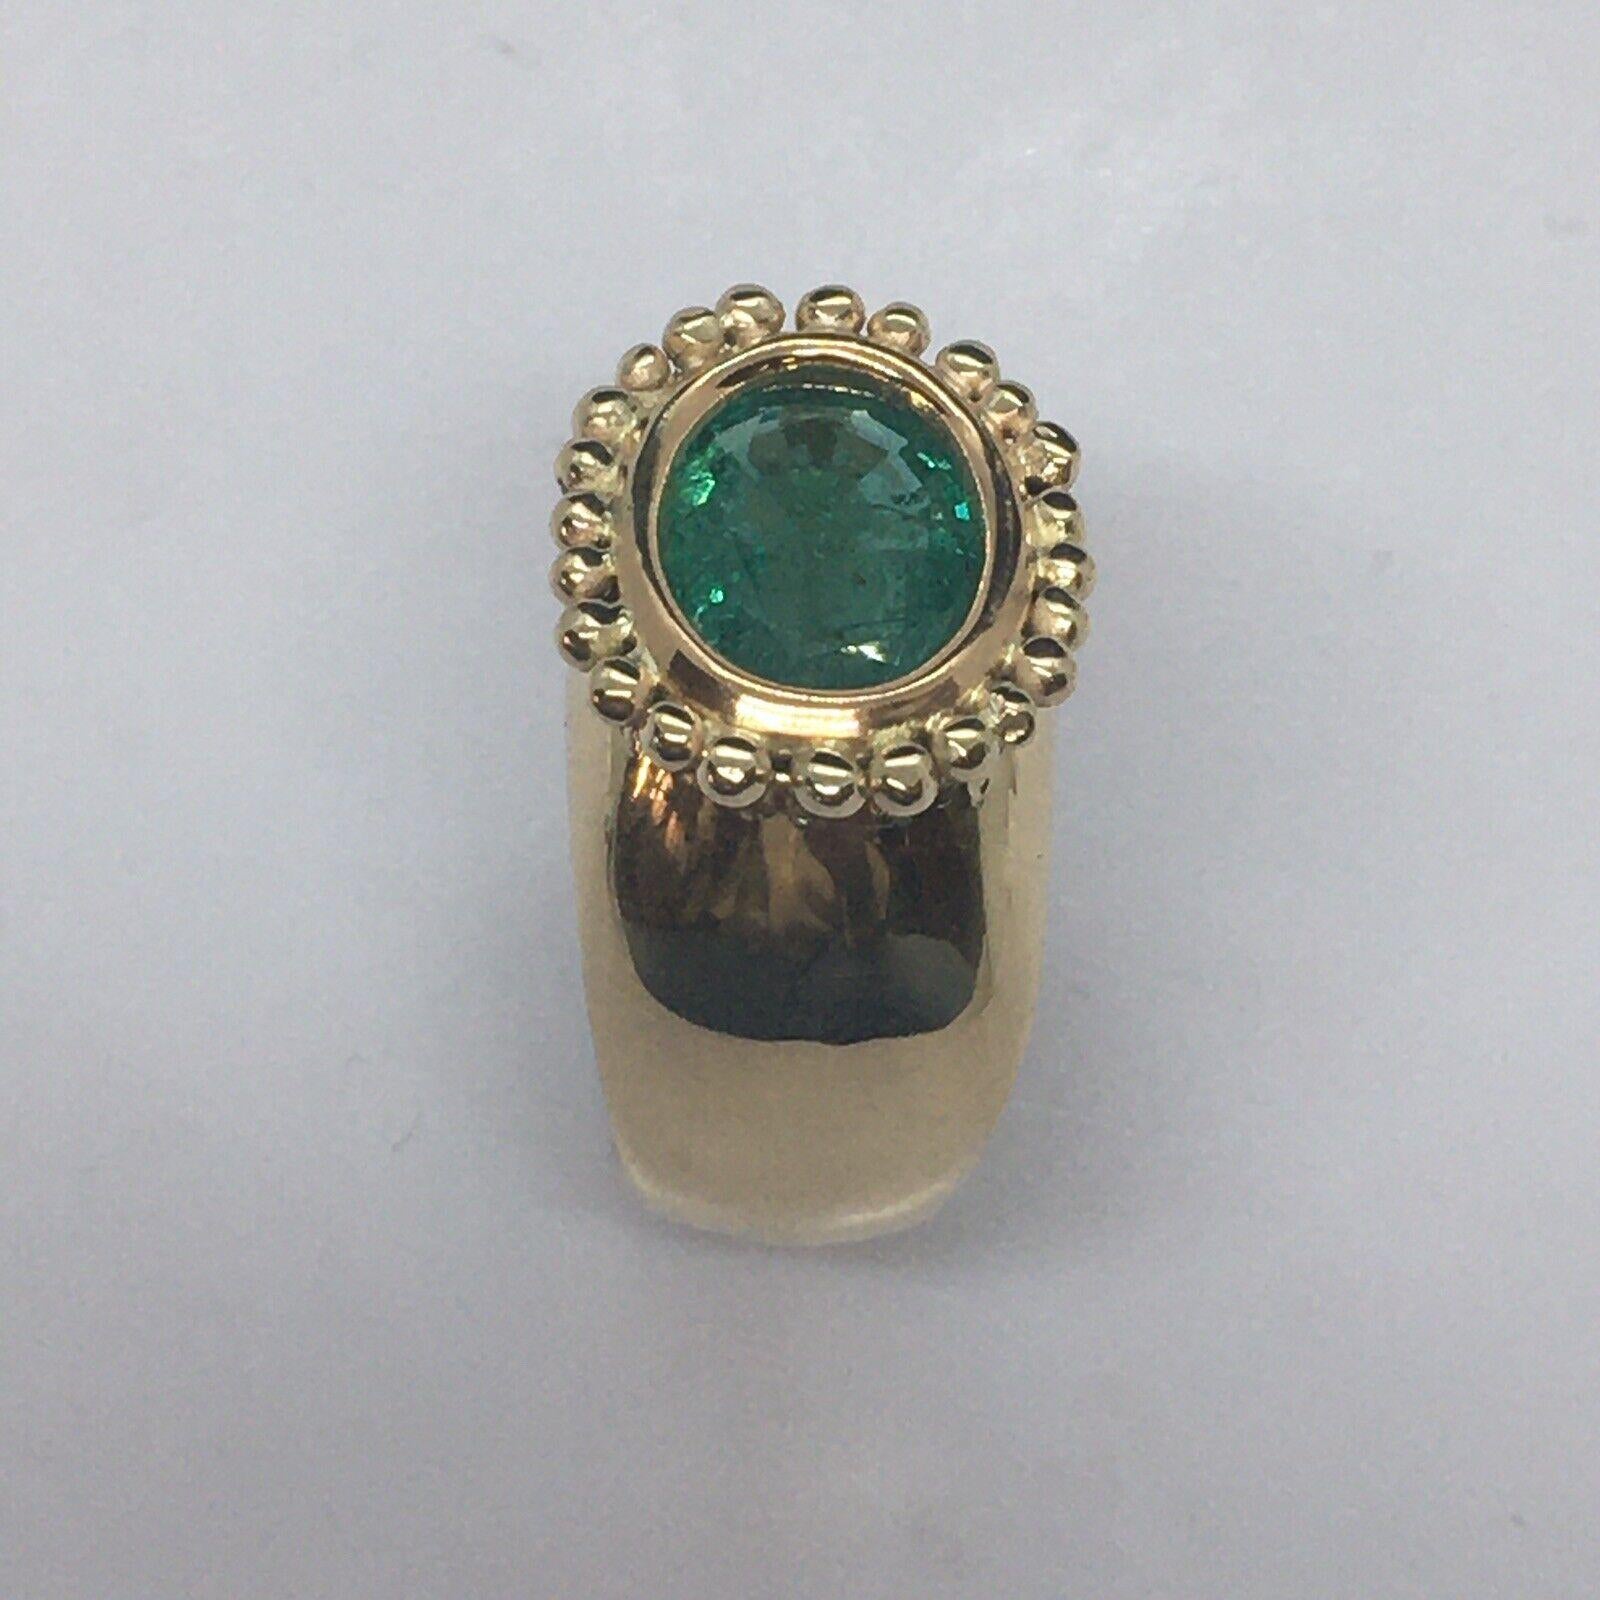 14K Yellow Gold Natural Earth Mined Emerald Halo Granulation Lady's Ring 


9.1 gram
Size 6
11.5mm by 8 mm by 4.5 mm natural Emerald calculating to be 2.15 Carat
Marked 